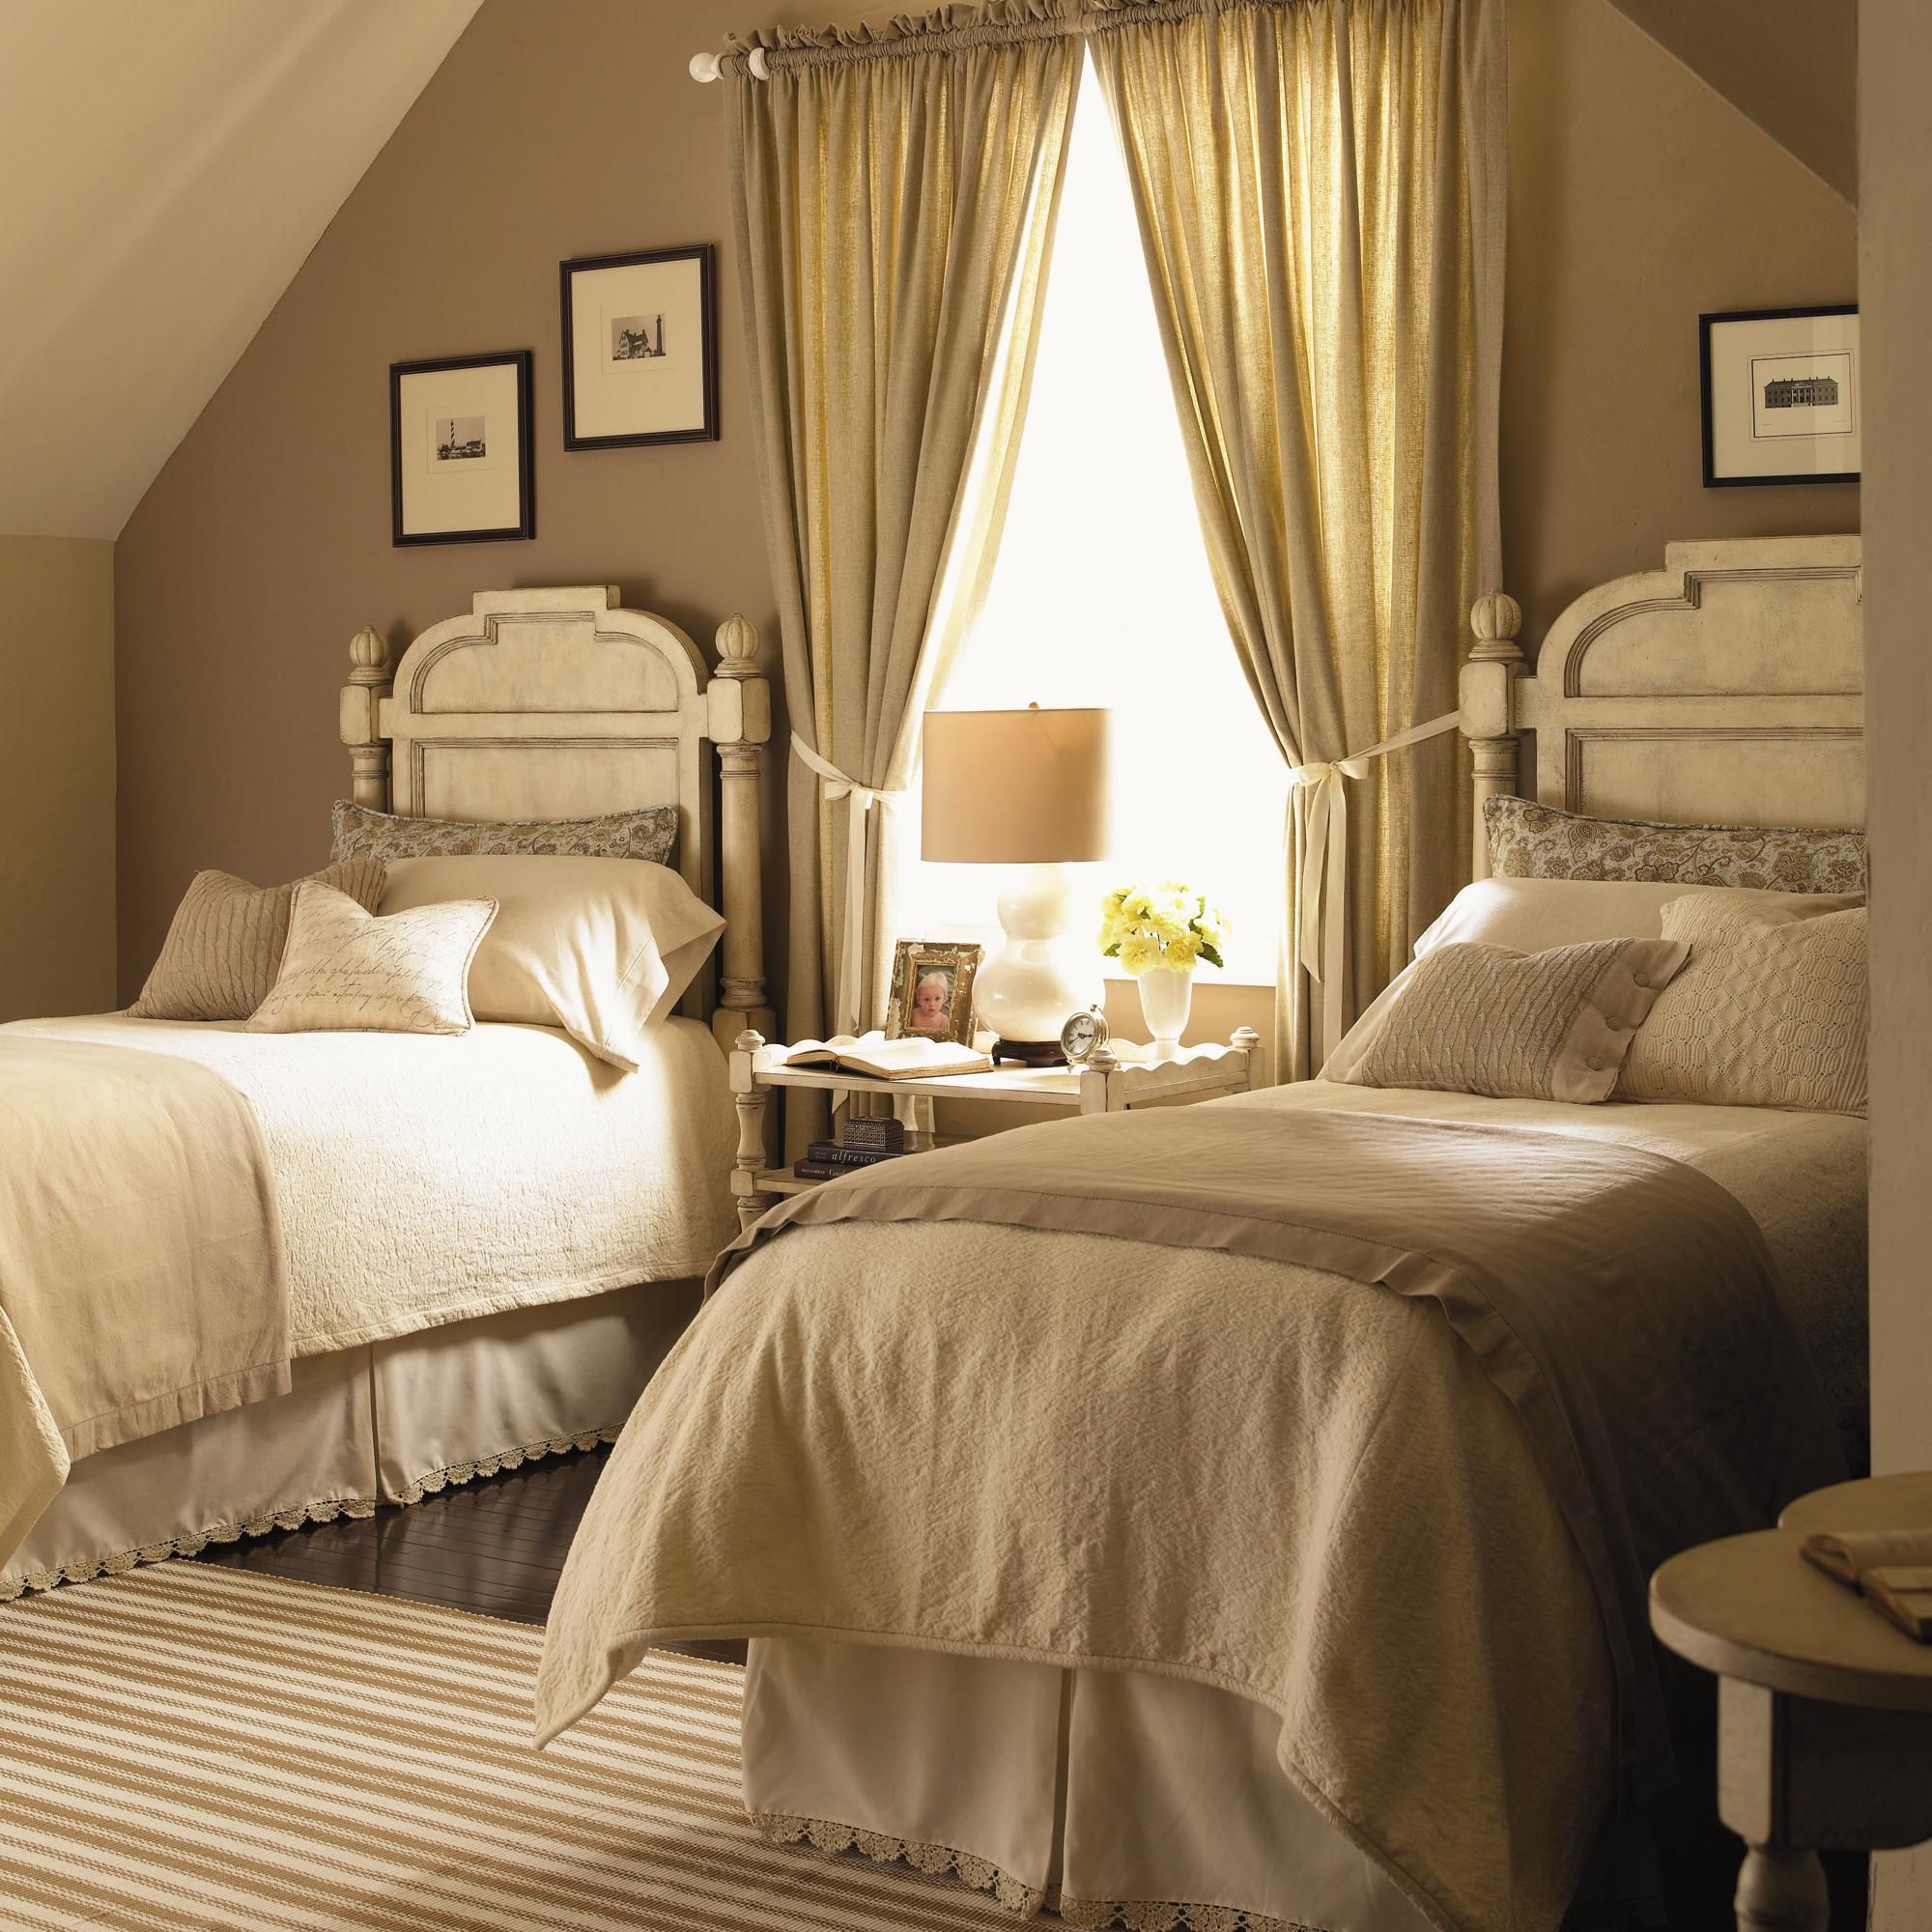 traditional guest bedroom ideas photo - 3